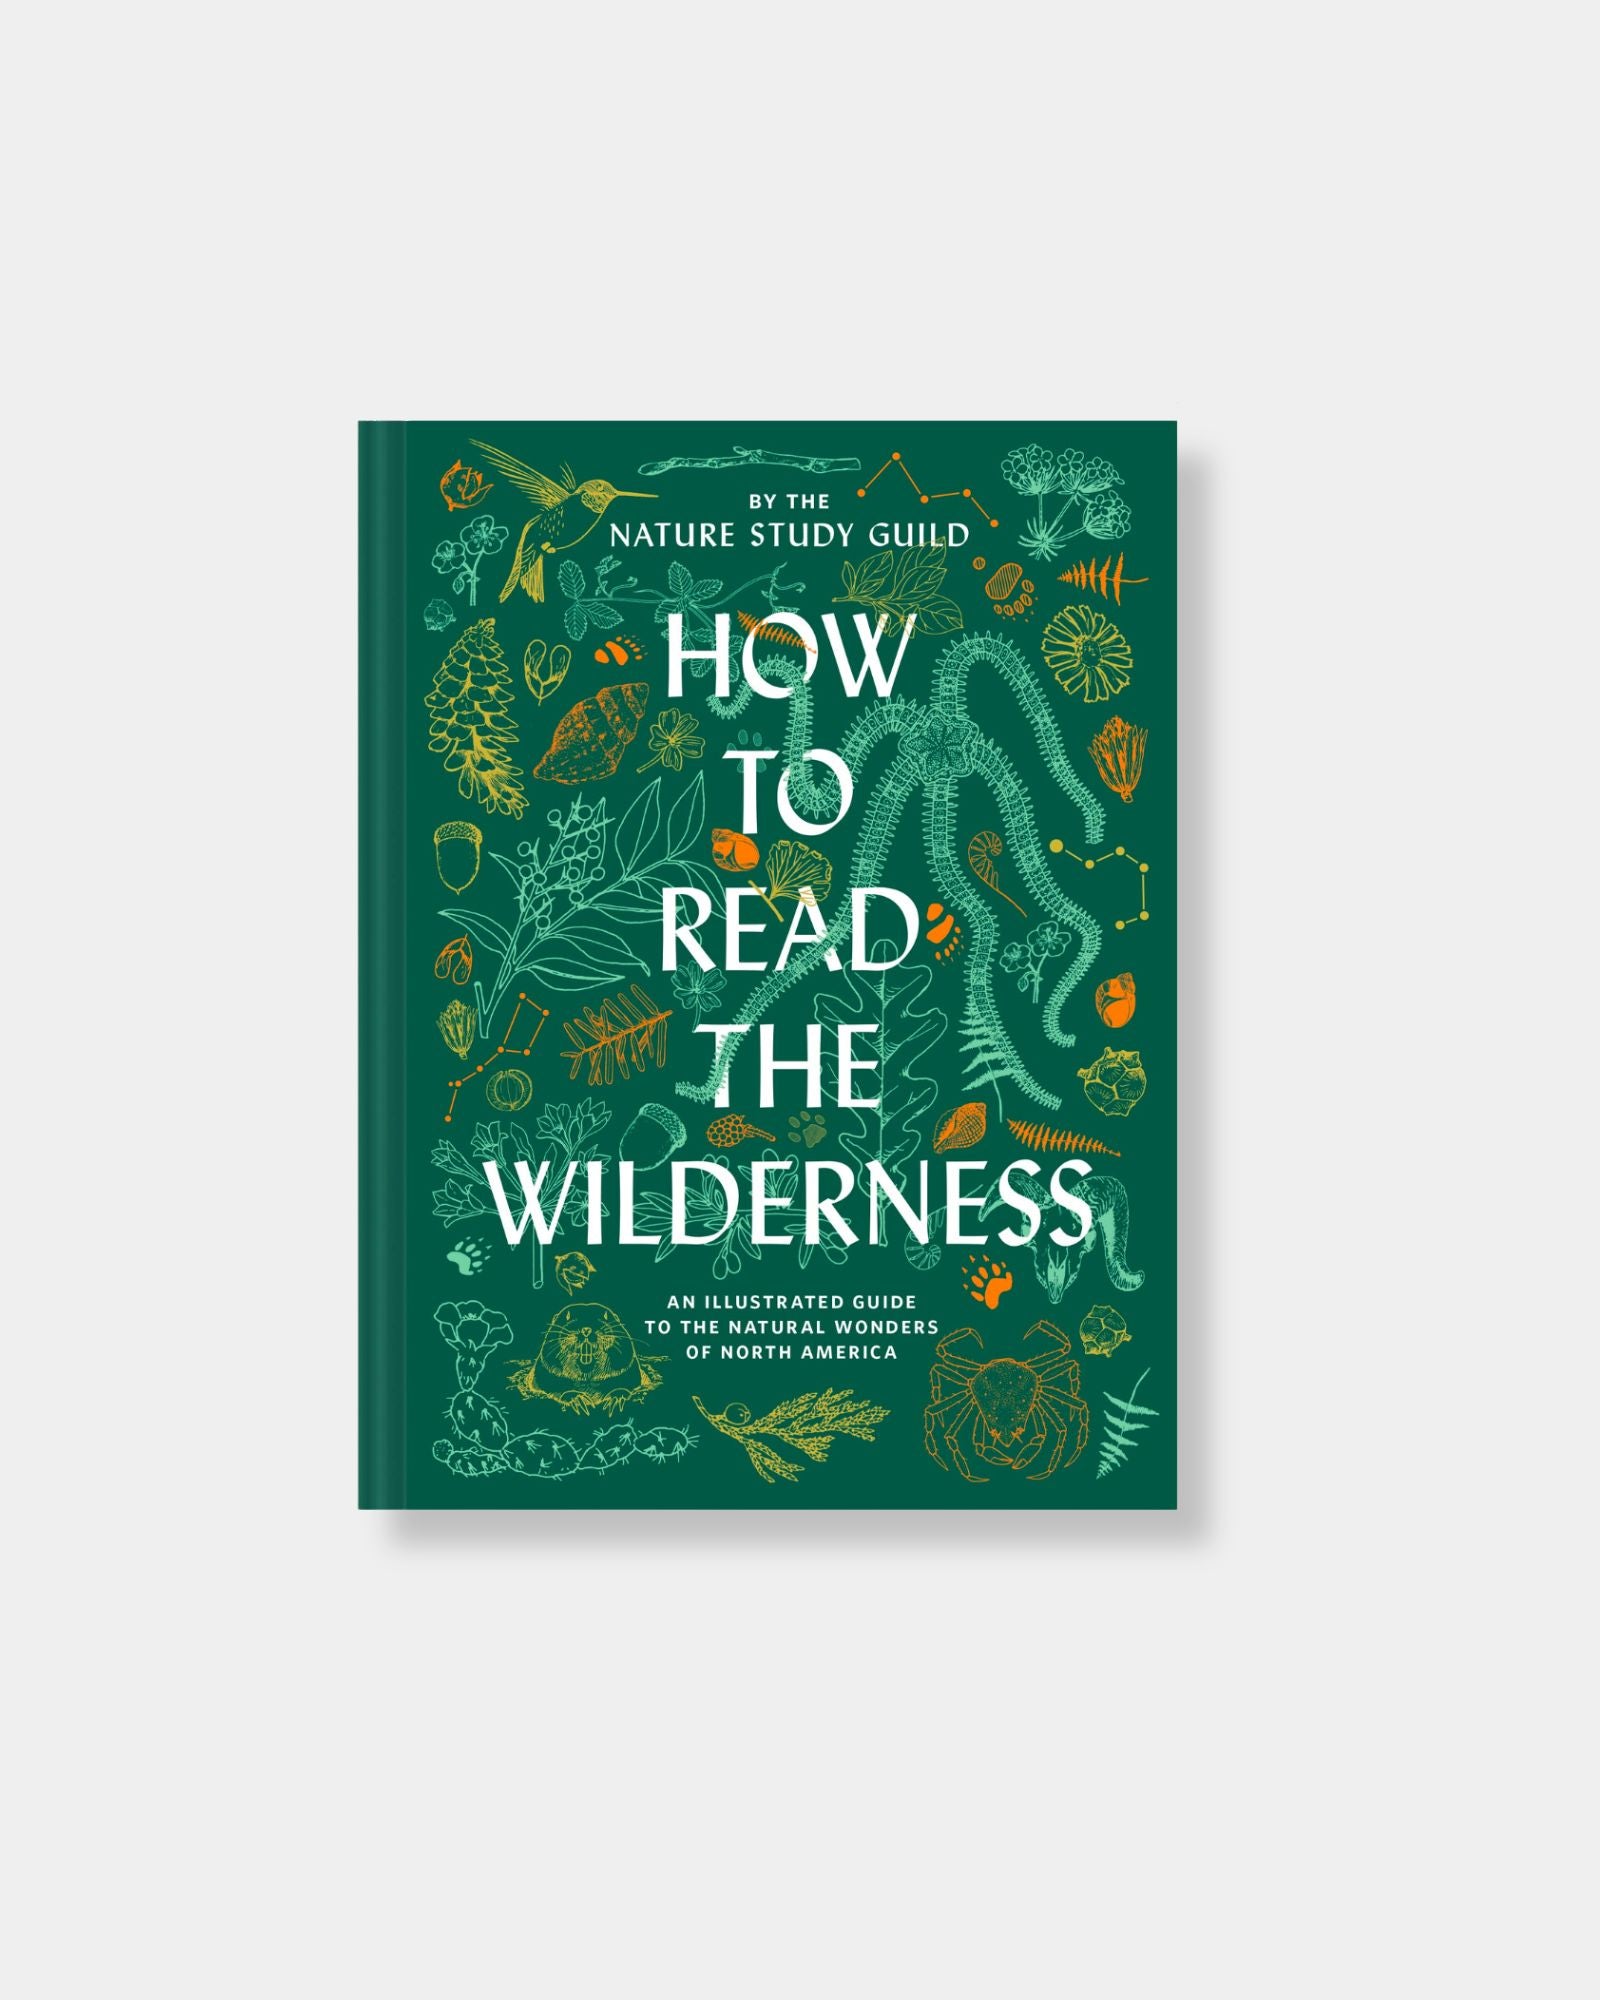 HOW TO READ THE WILDERNESS - BOOK